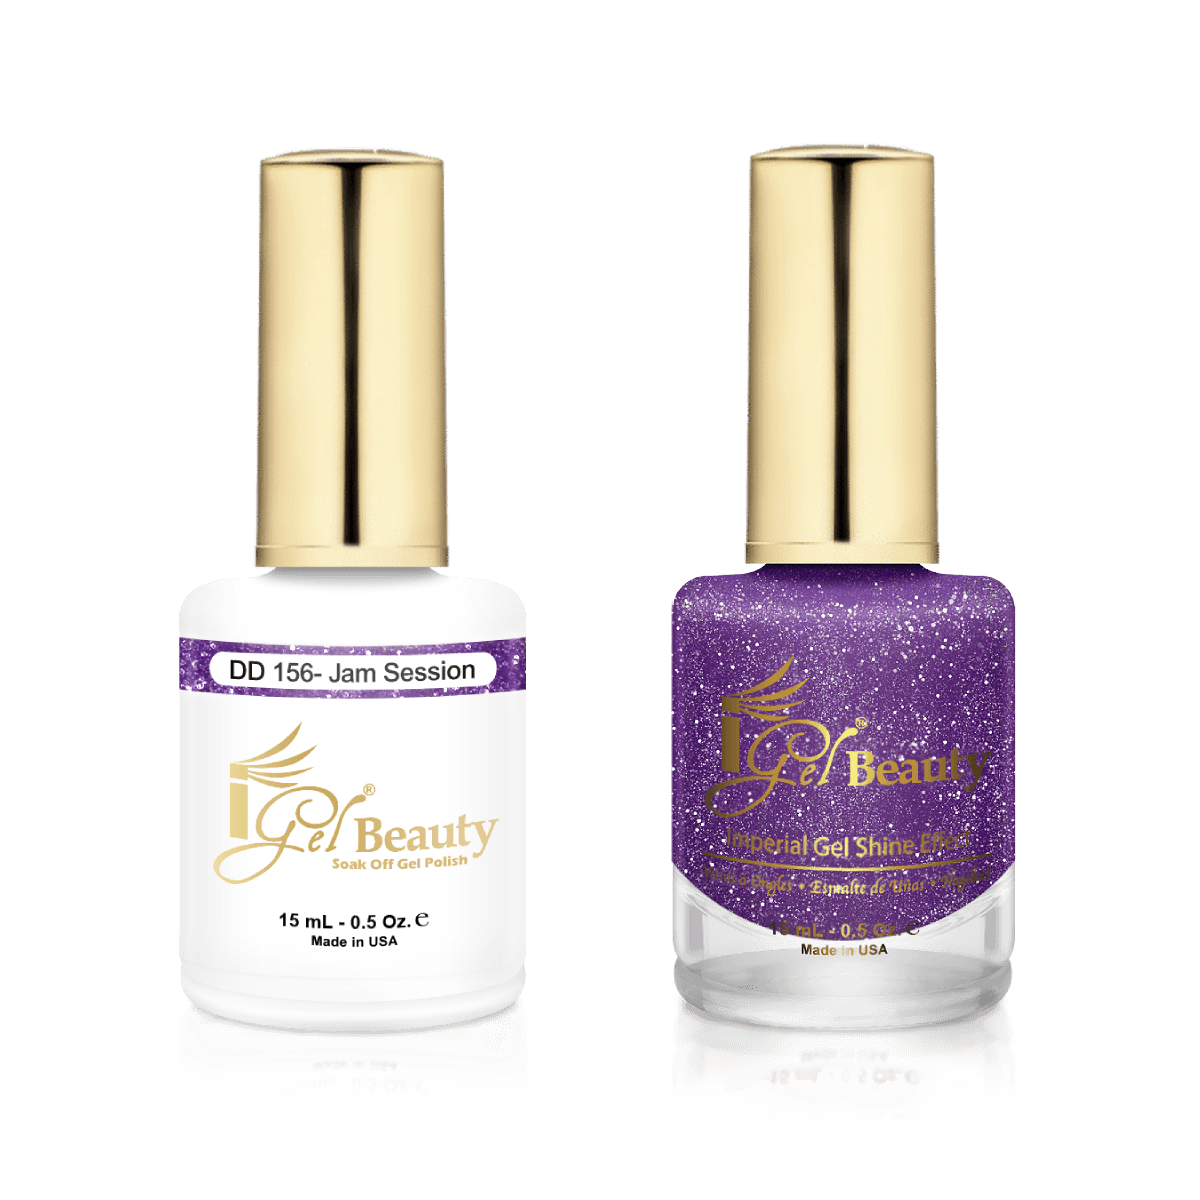 IGel Duo Gel Polish + Matching Nail Lacquer DD 156 JAM SESSION